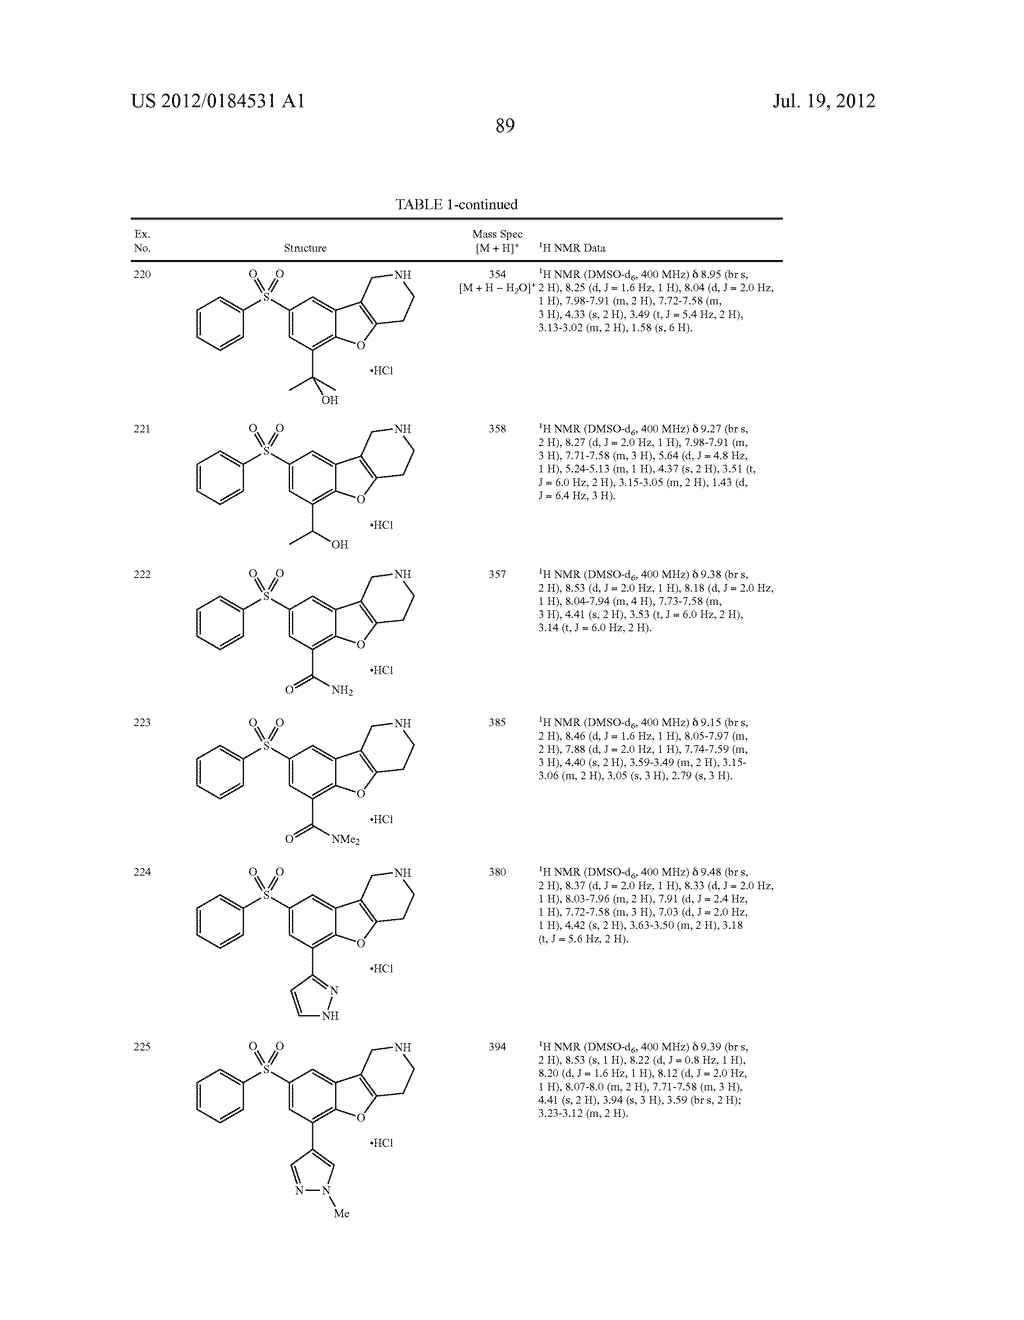 BENZOFURO[3,2-c] PYRIDINES AND RELATED ANALOGS AS SEROTONIN SUB-TYPE 6     (5-HT6) MODULATORS FOR THE TREATMENT OF OBESITY, METABOLIC SYNDROME,     COGNITION AND SCHIZOPHRENIA - diagram, schematic, and image 90